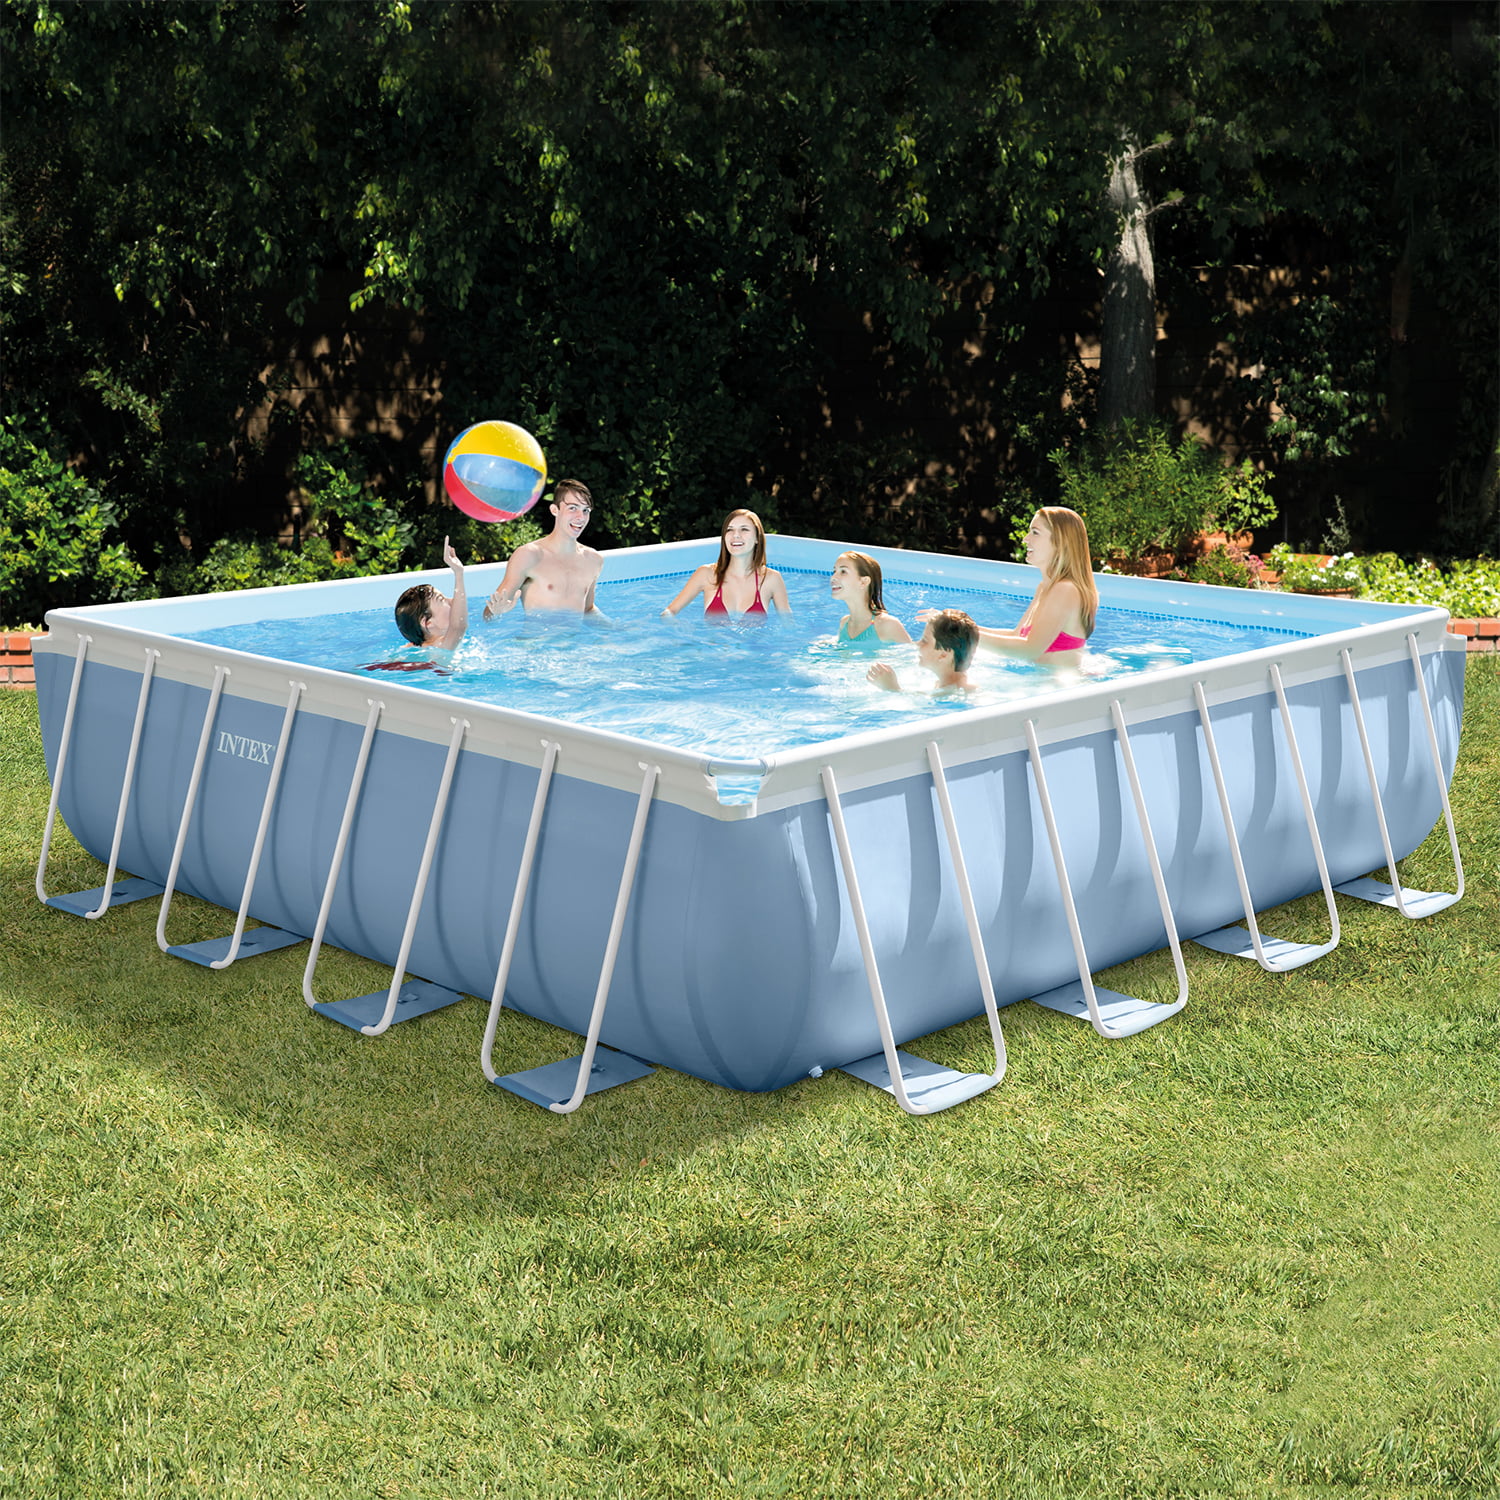 Latest Intex Above Ground Swimming Pools Ideas in 2022